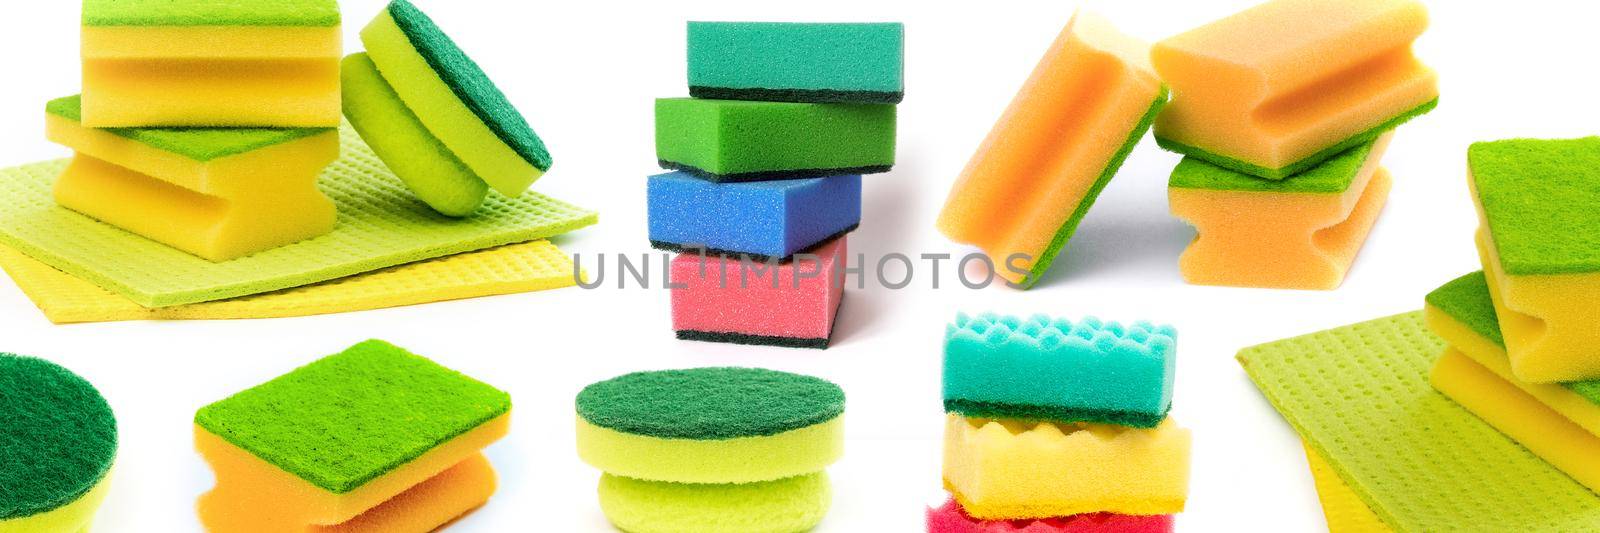 Colorful kitchen sponges set collage isolated on white background. Group of home cleaning tools for washing and housekeeping